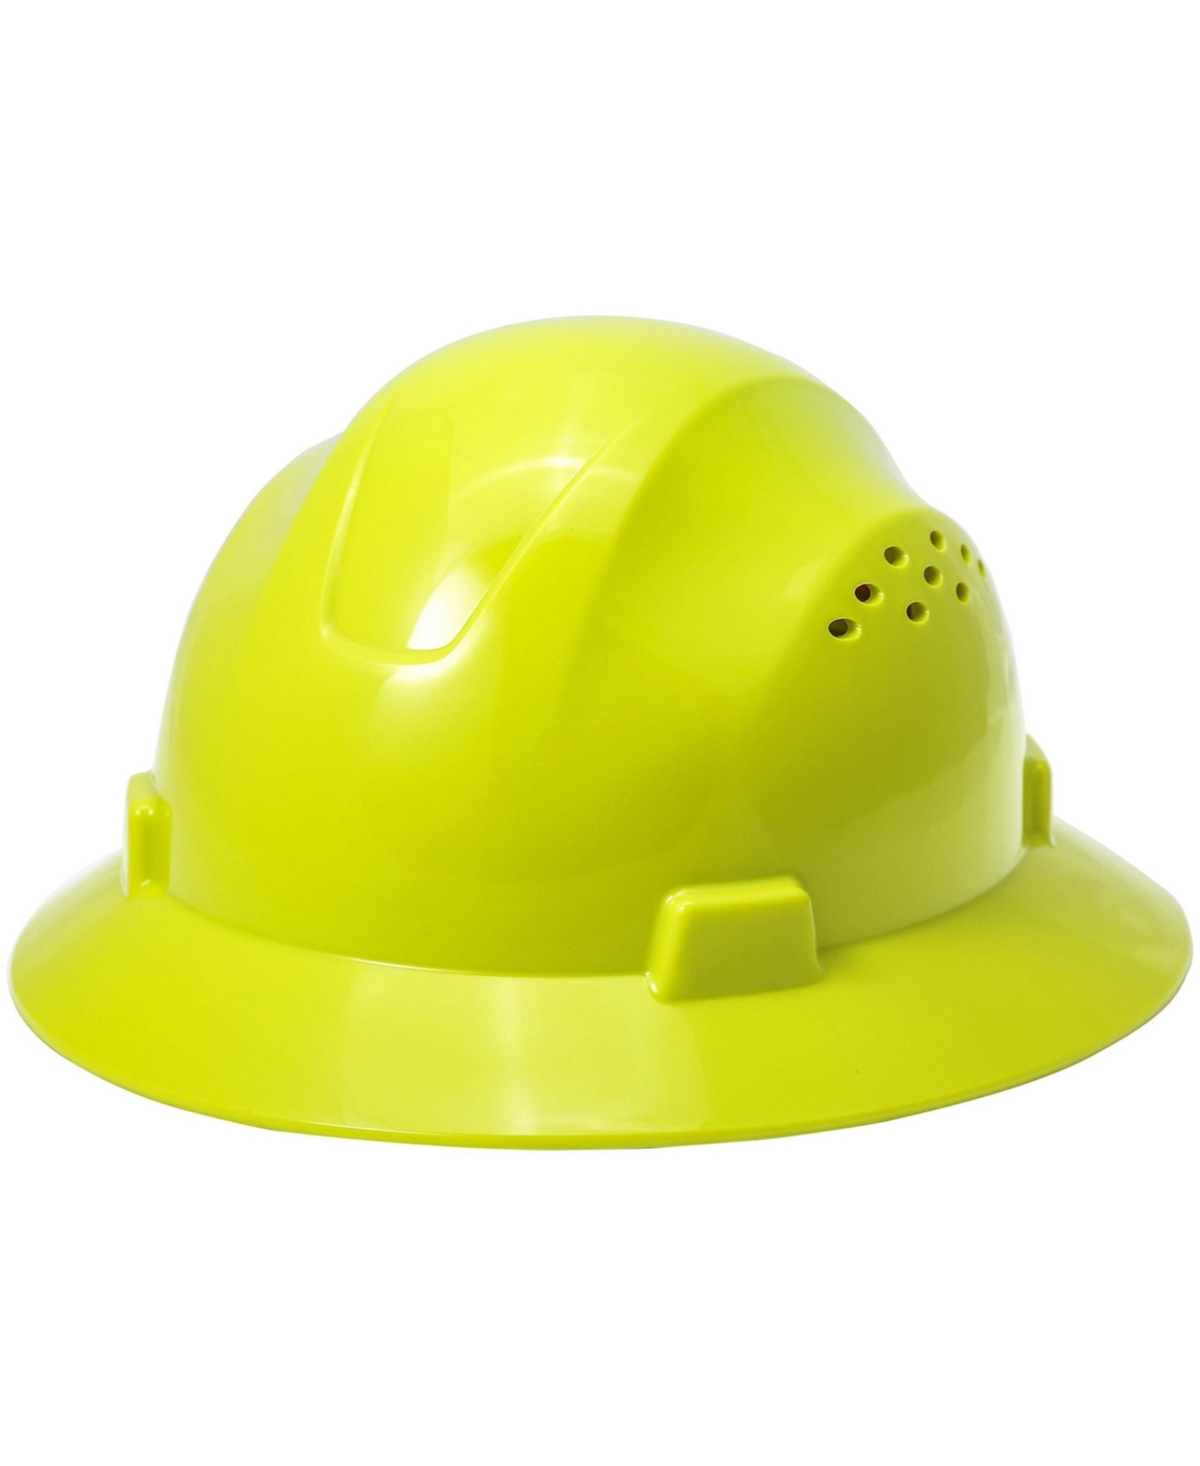 Noa Store Hdpe Lime Full Brim Hard Hat with Fas trac Suspension - Lime